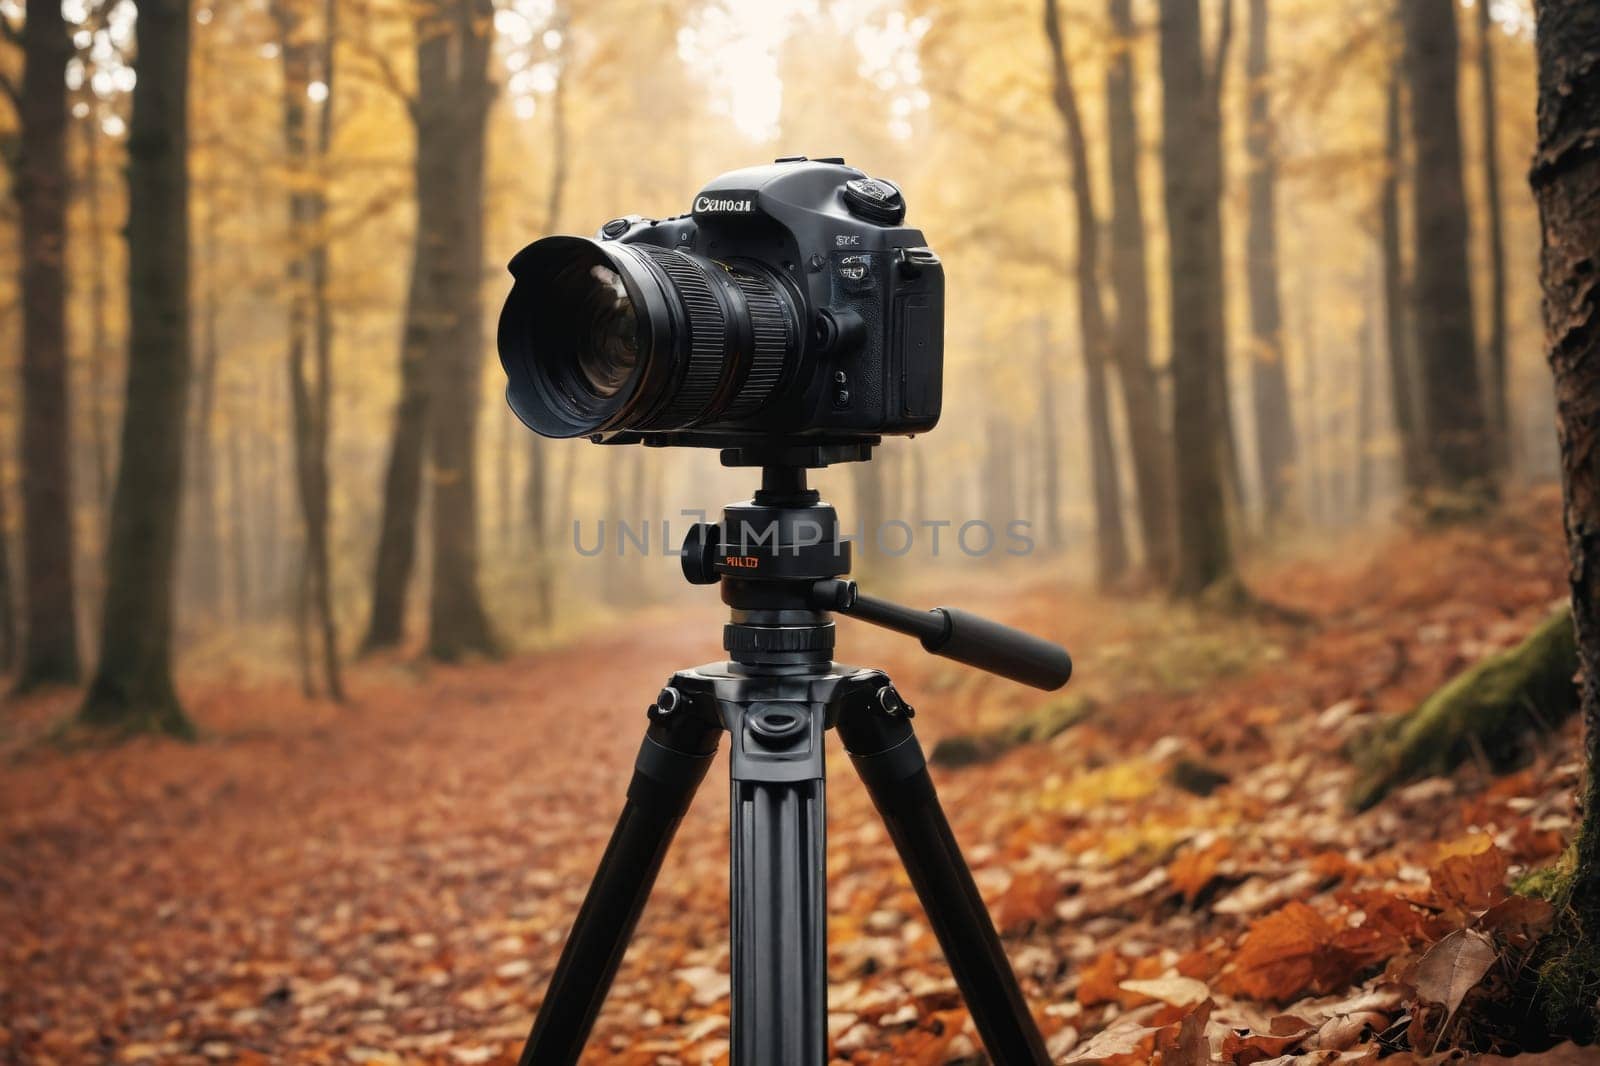 A camera on a tripod is set up in the woods, surrounded by fallen leaves on the ground, creating the perfect scene for nature photography.